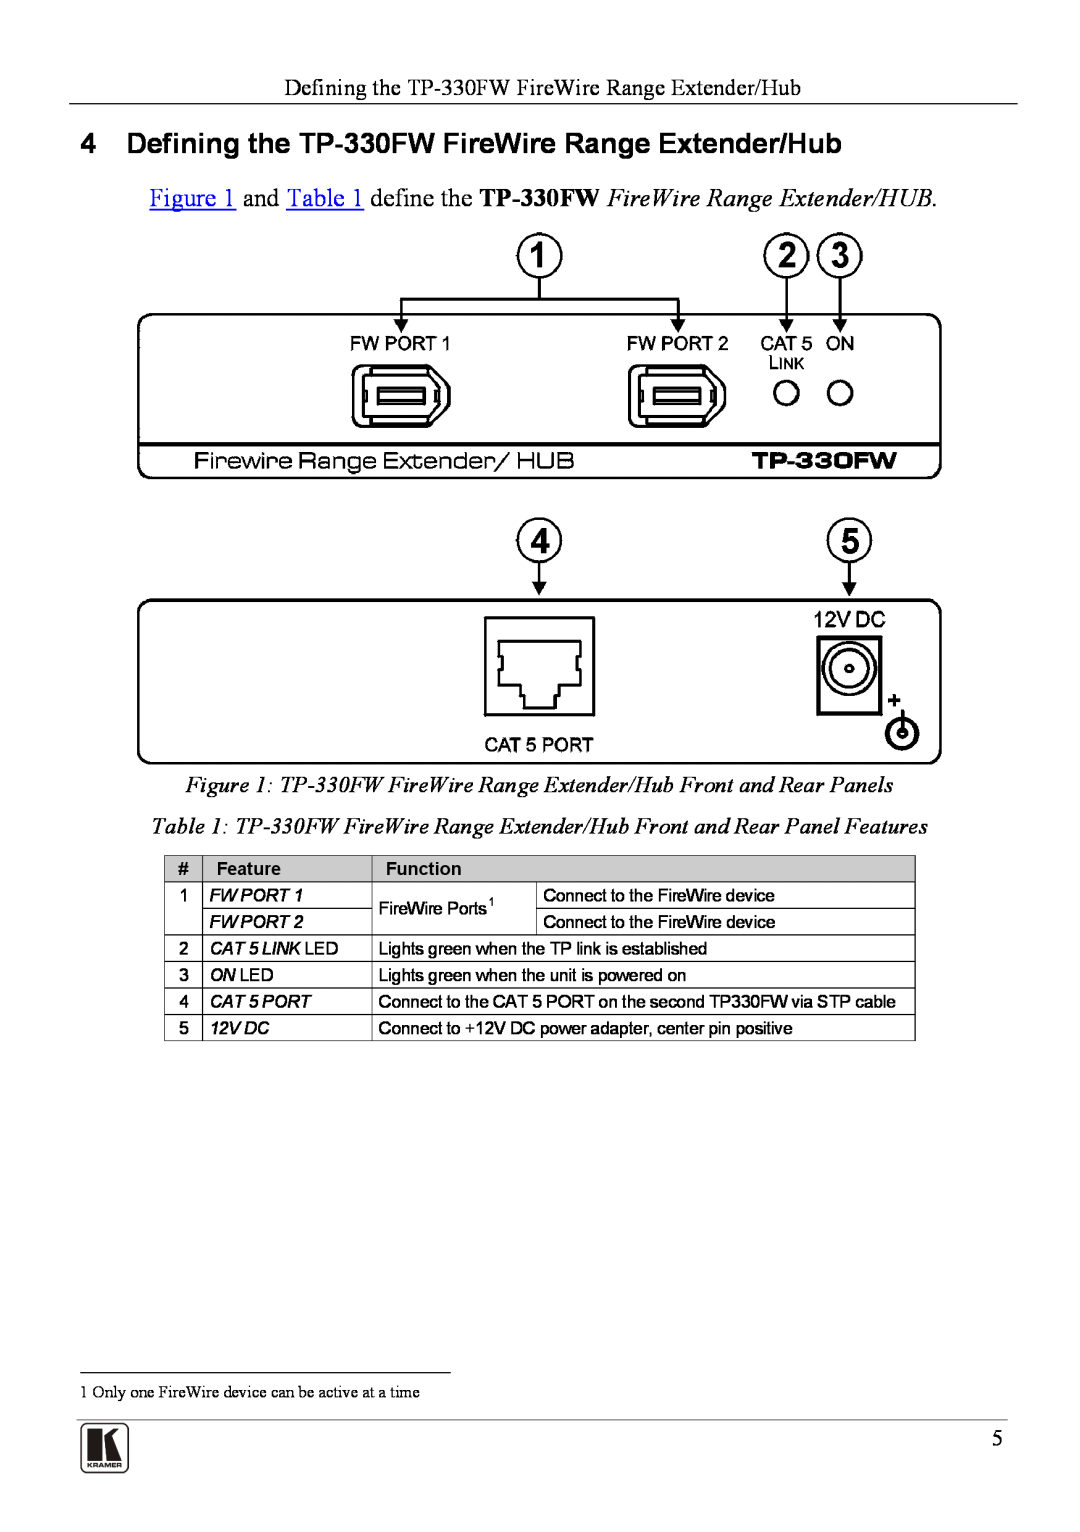 Kramer Electronics user manual Defining the TP-330FWFireWire Range Extender/Hub, Feature, Function 